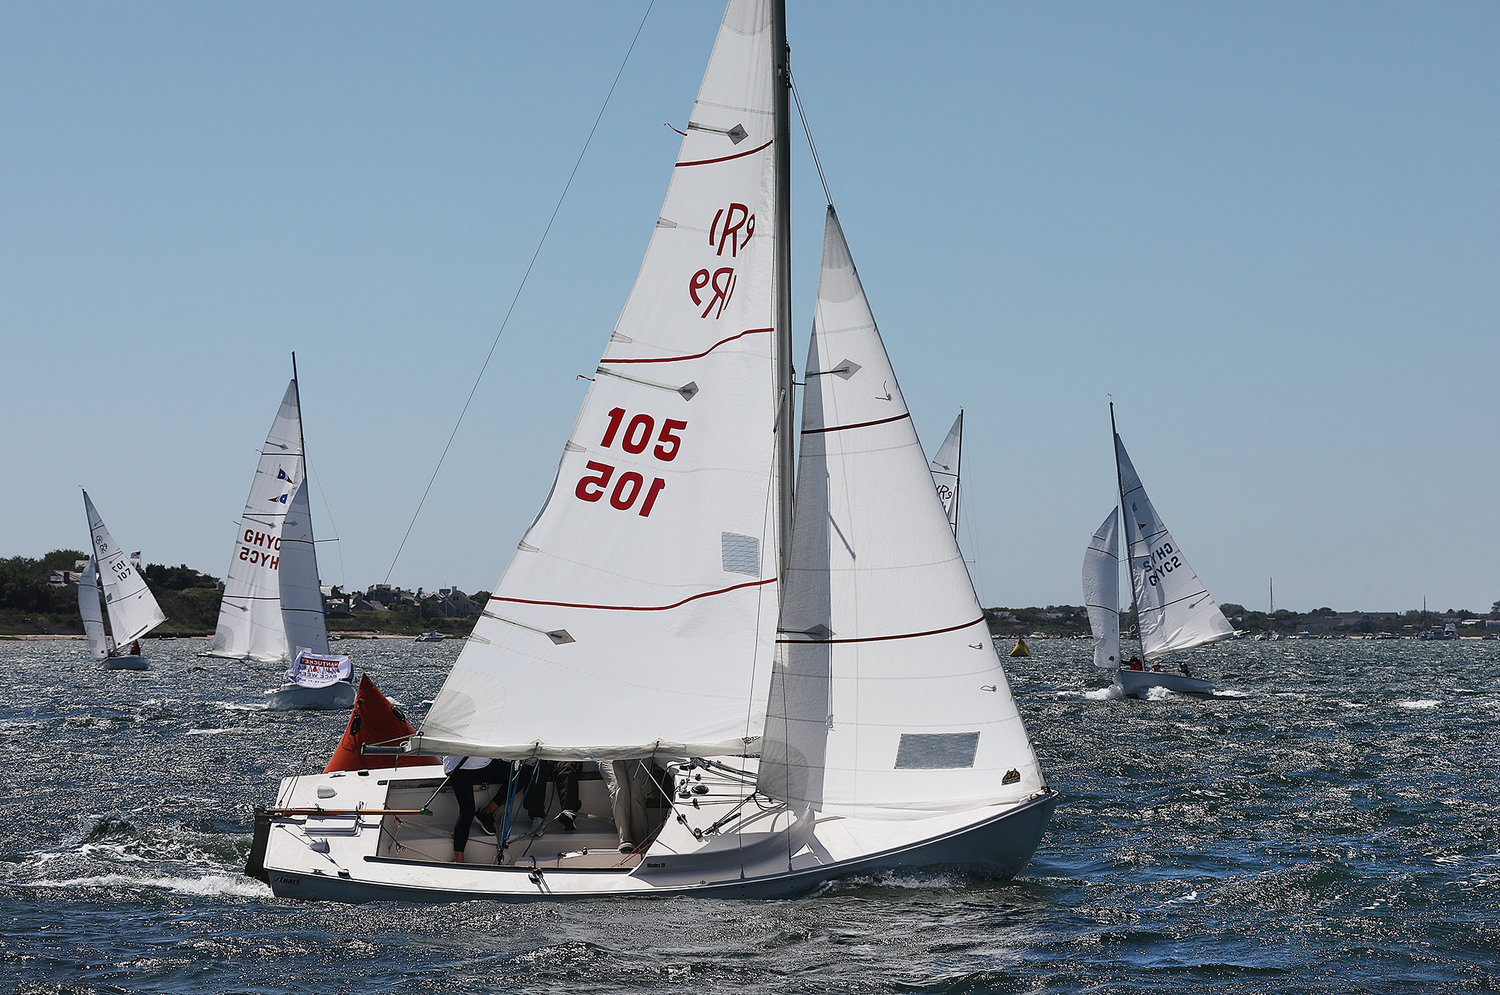 Boats race during the Women's Regatta in the harbor on Thursday.